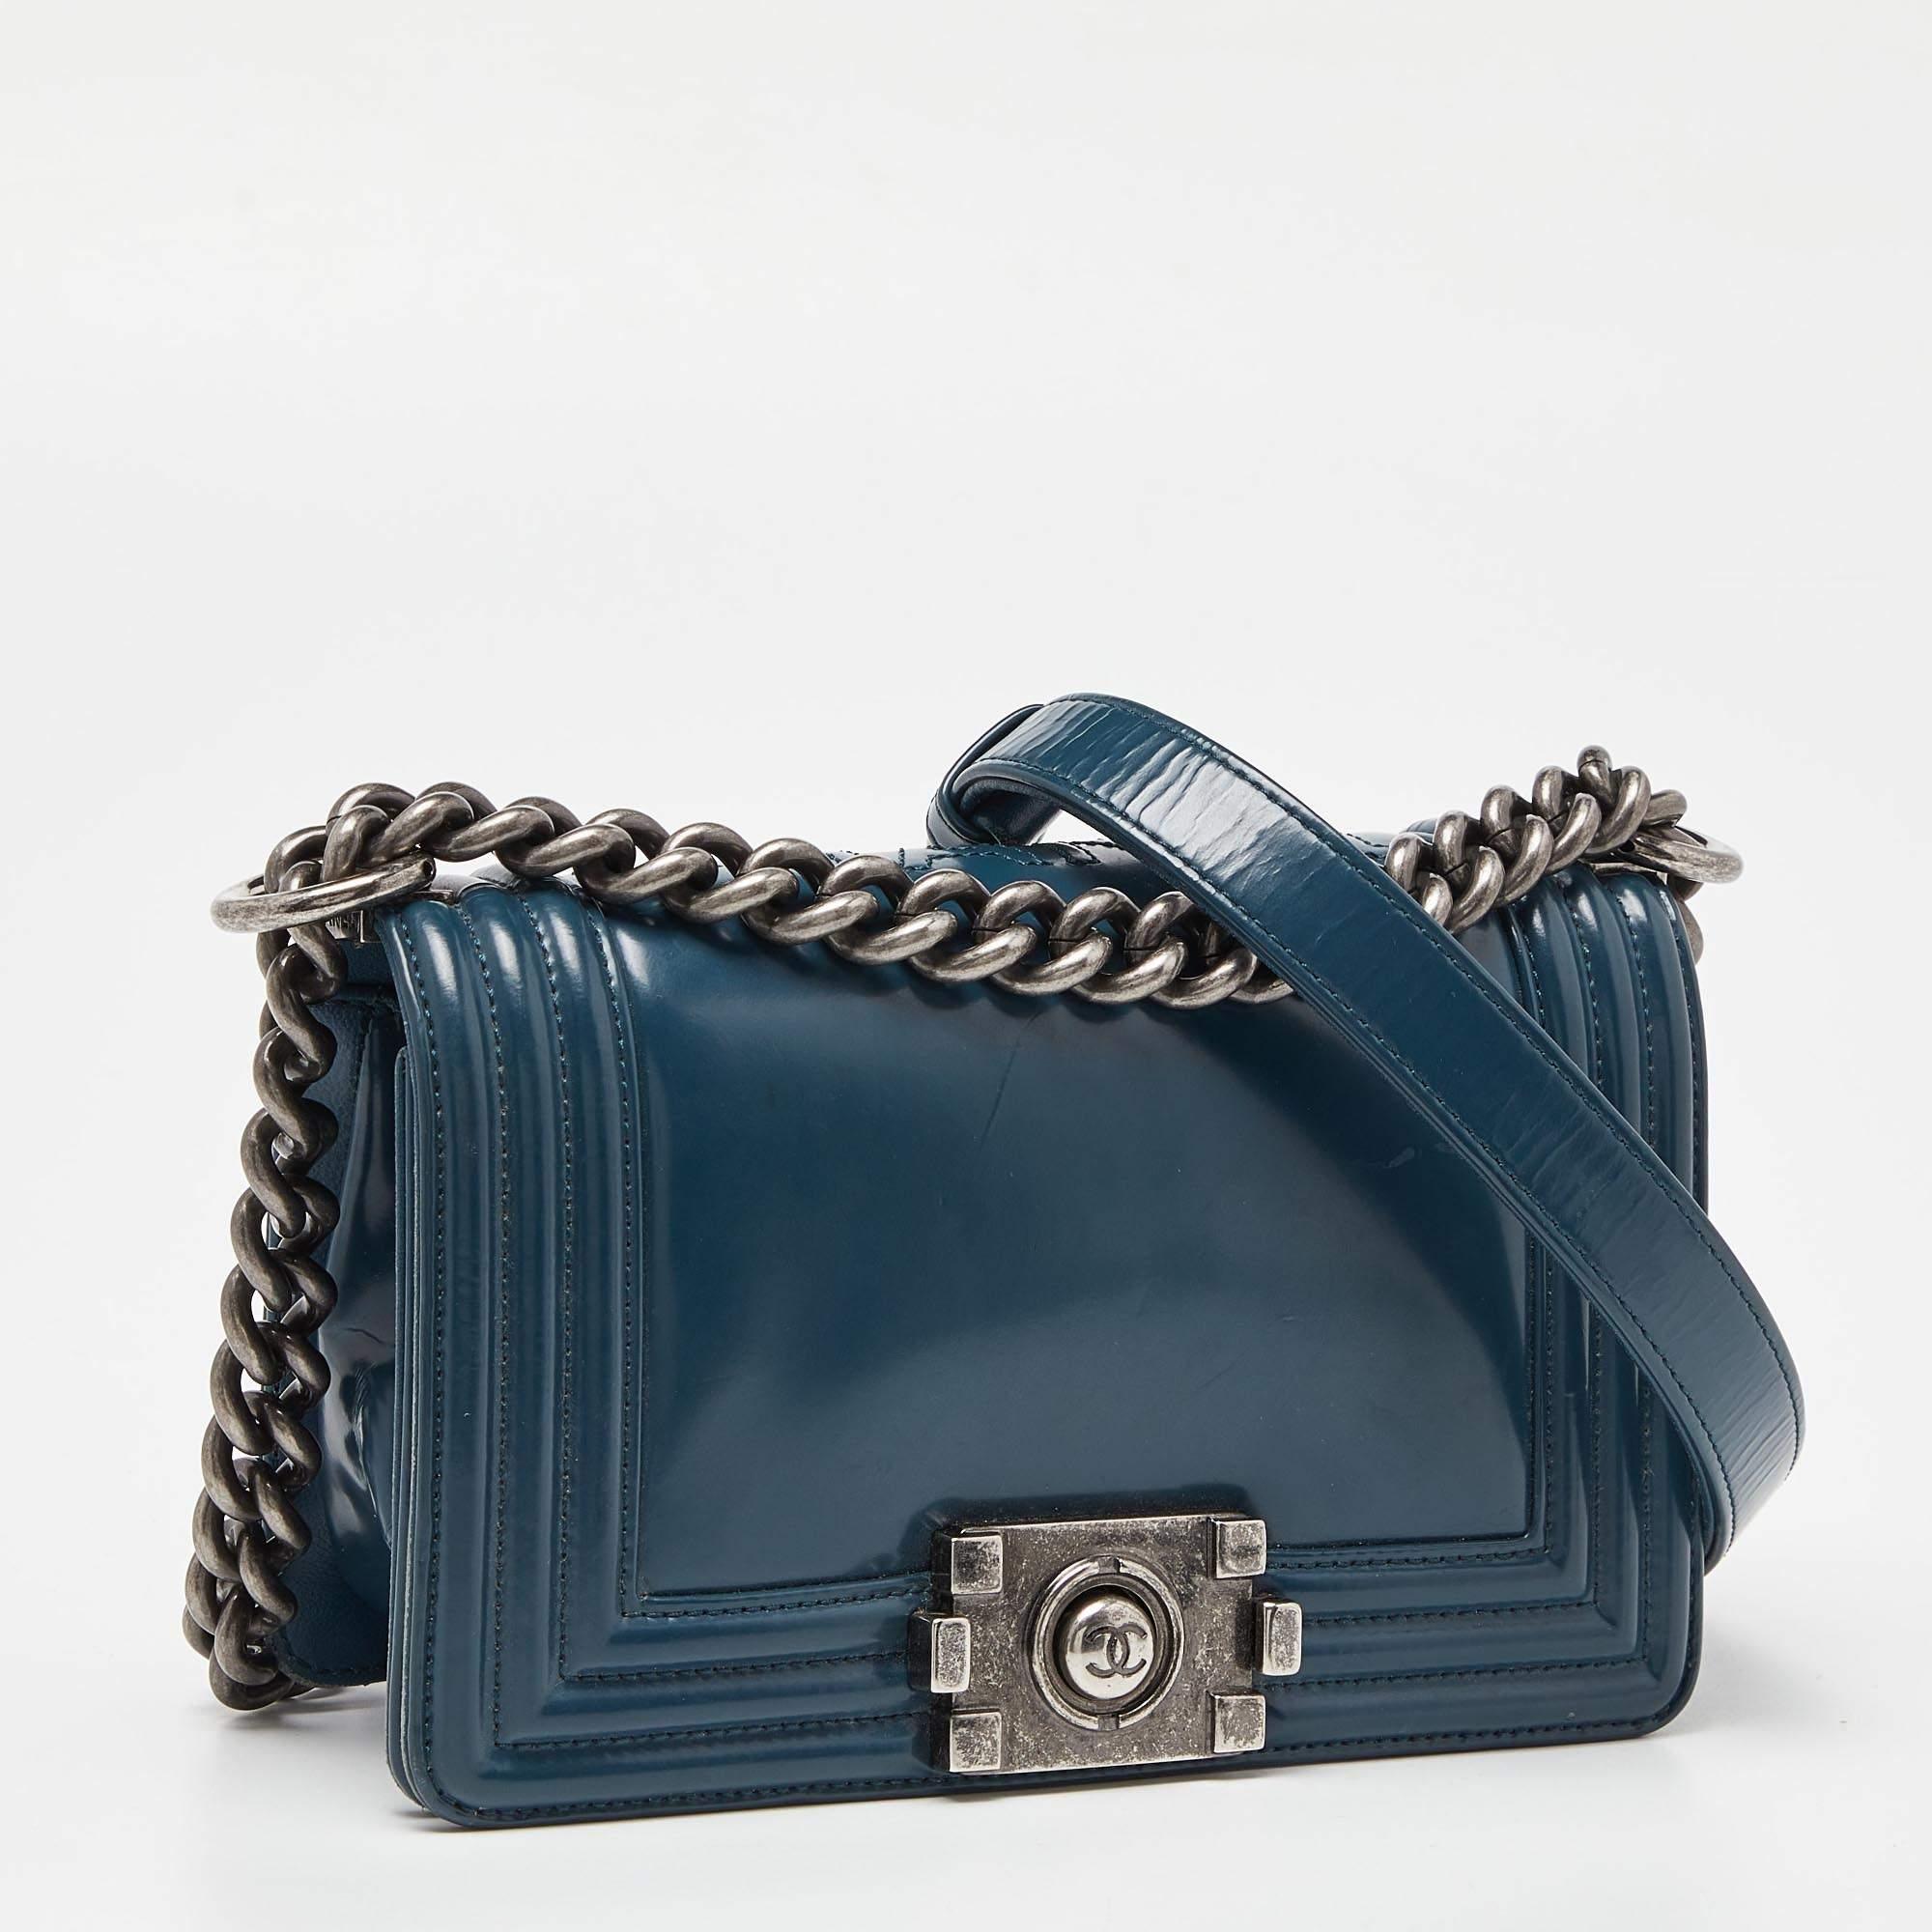 Women's Chanel Blue Patent Leather Small Boy Bag